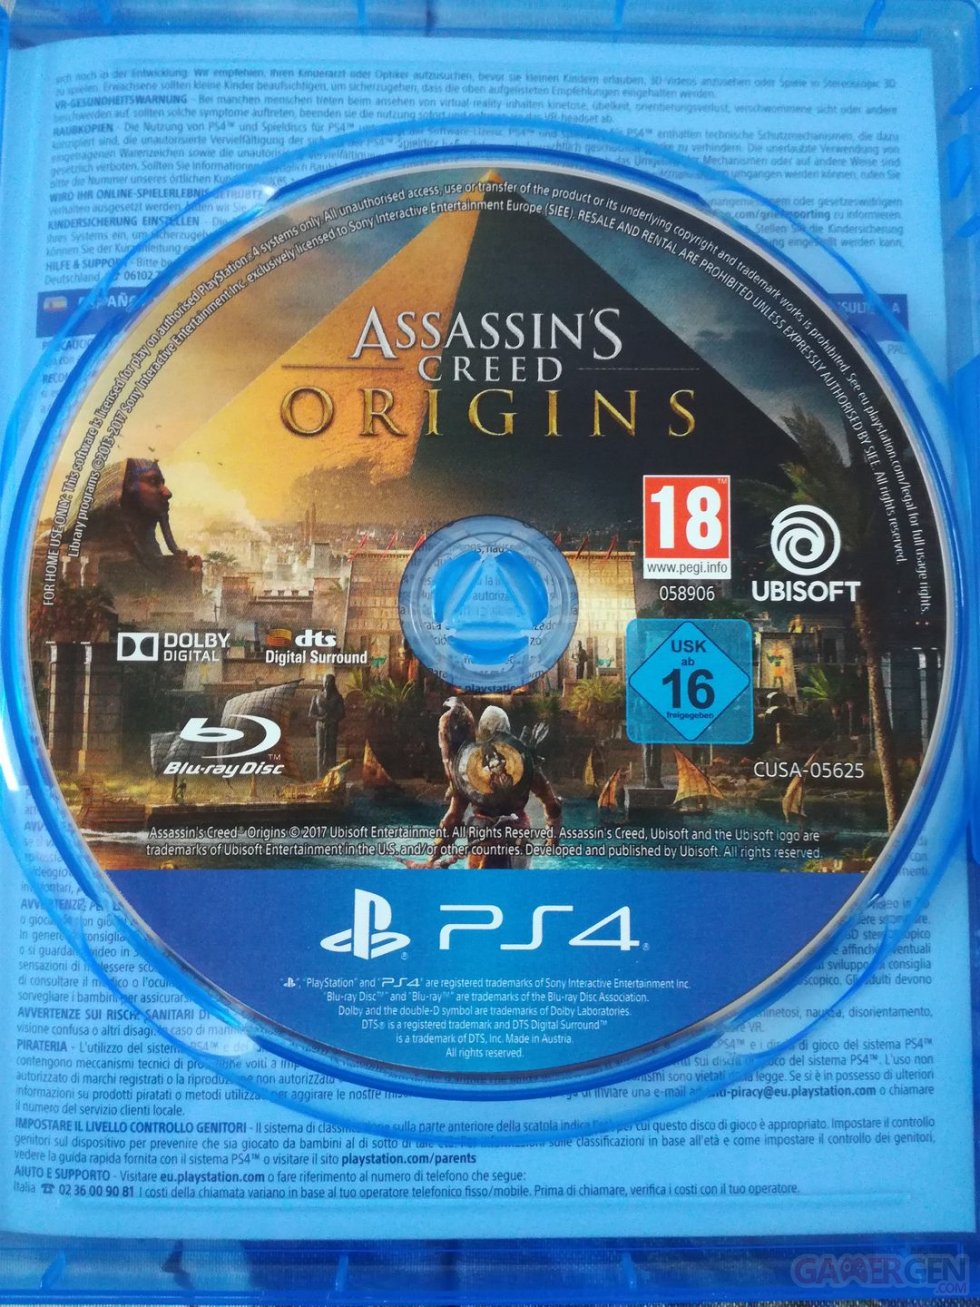 Assassin-Creed-Origins-collector-Dawn-of-the-Creed-unboxing-déballage-06-31-10-2017